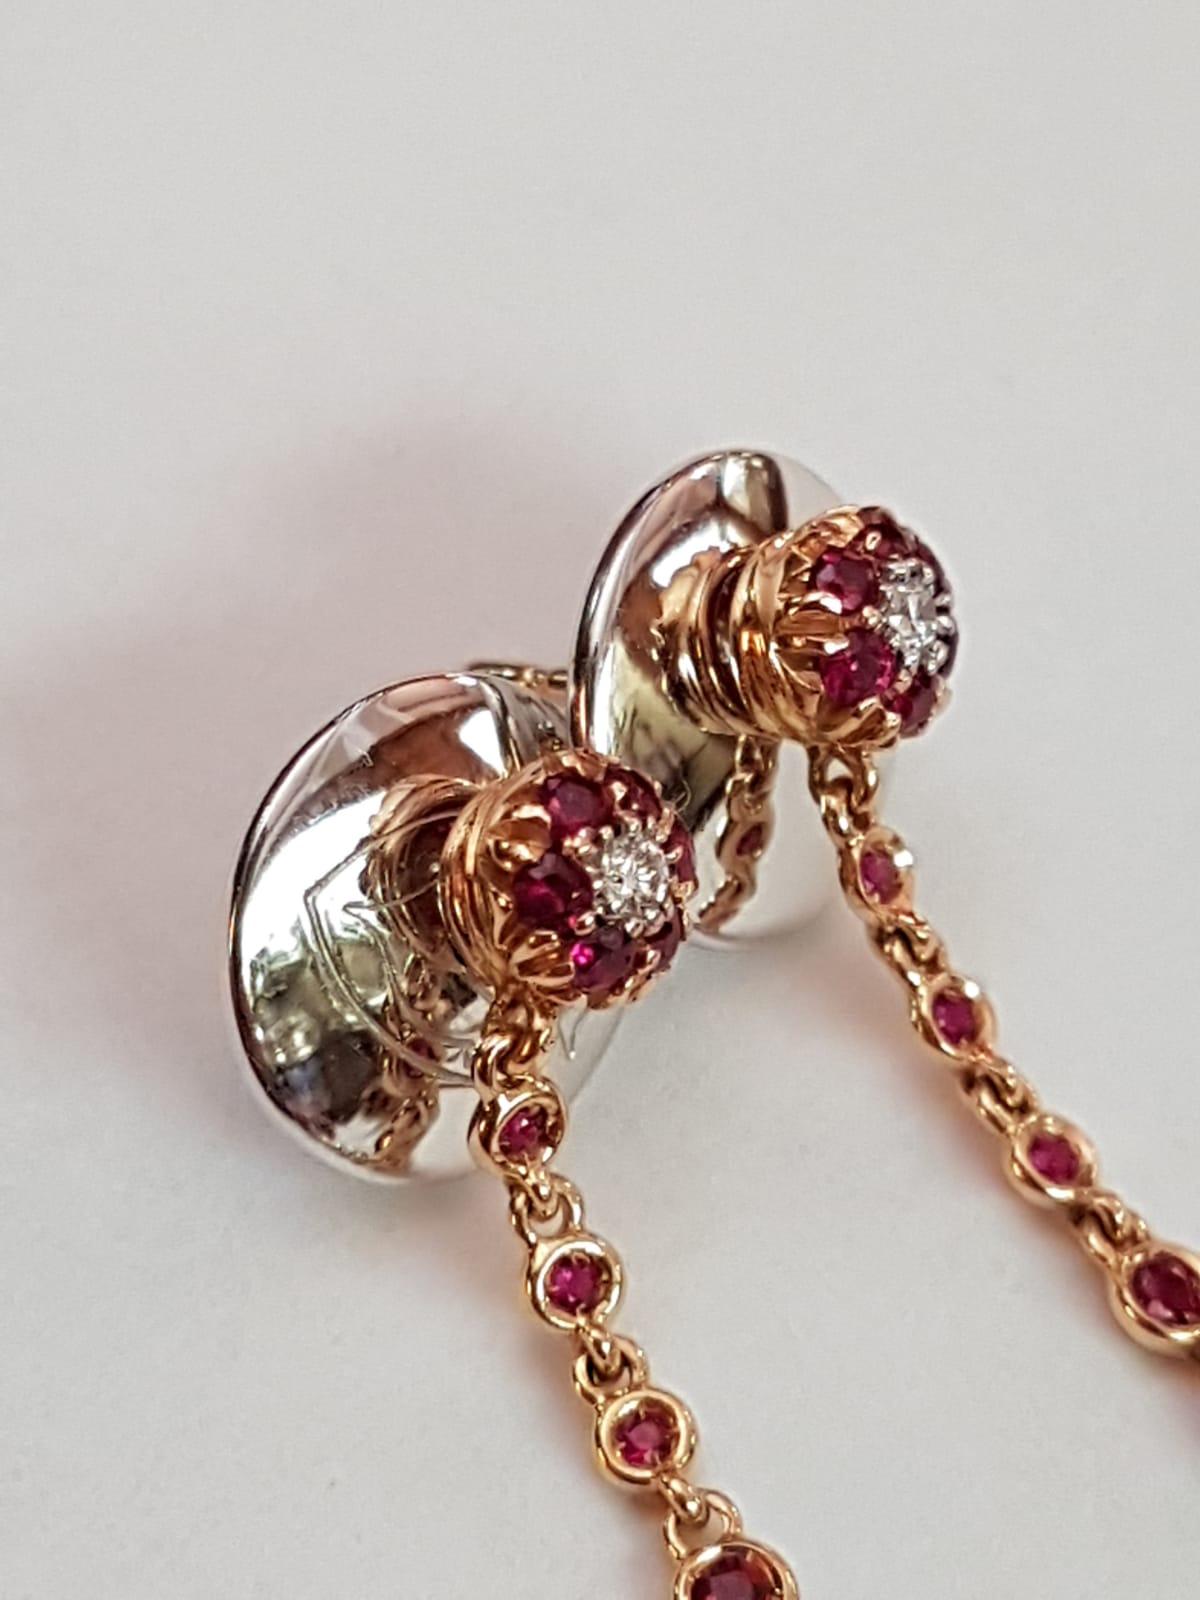 This is an authentic contemporary brand new pair of drop earrings from Chantecler, they are crafted from 18k rose and white gold set with rubies and diamond. It features a round top stud with a sparkling diamond, dangling below from a chain is a